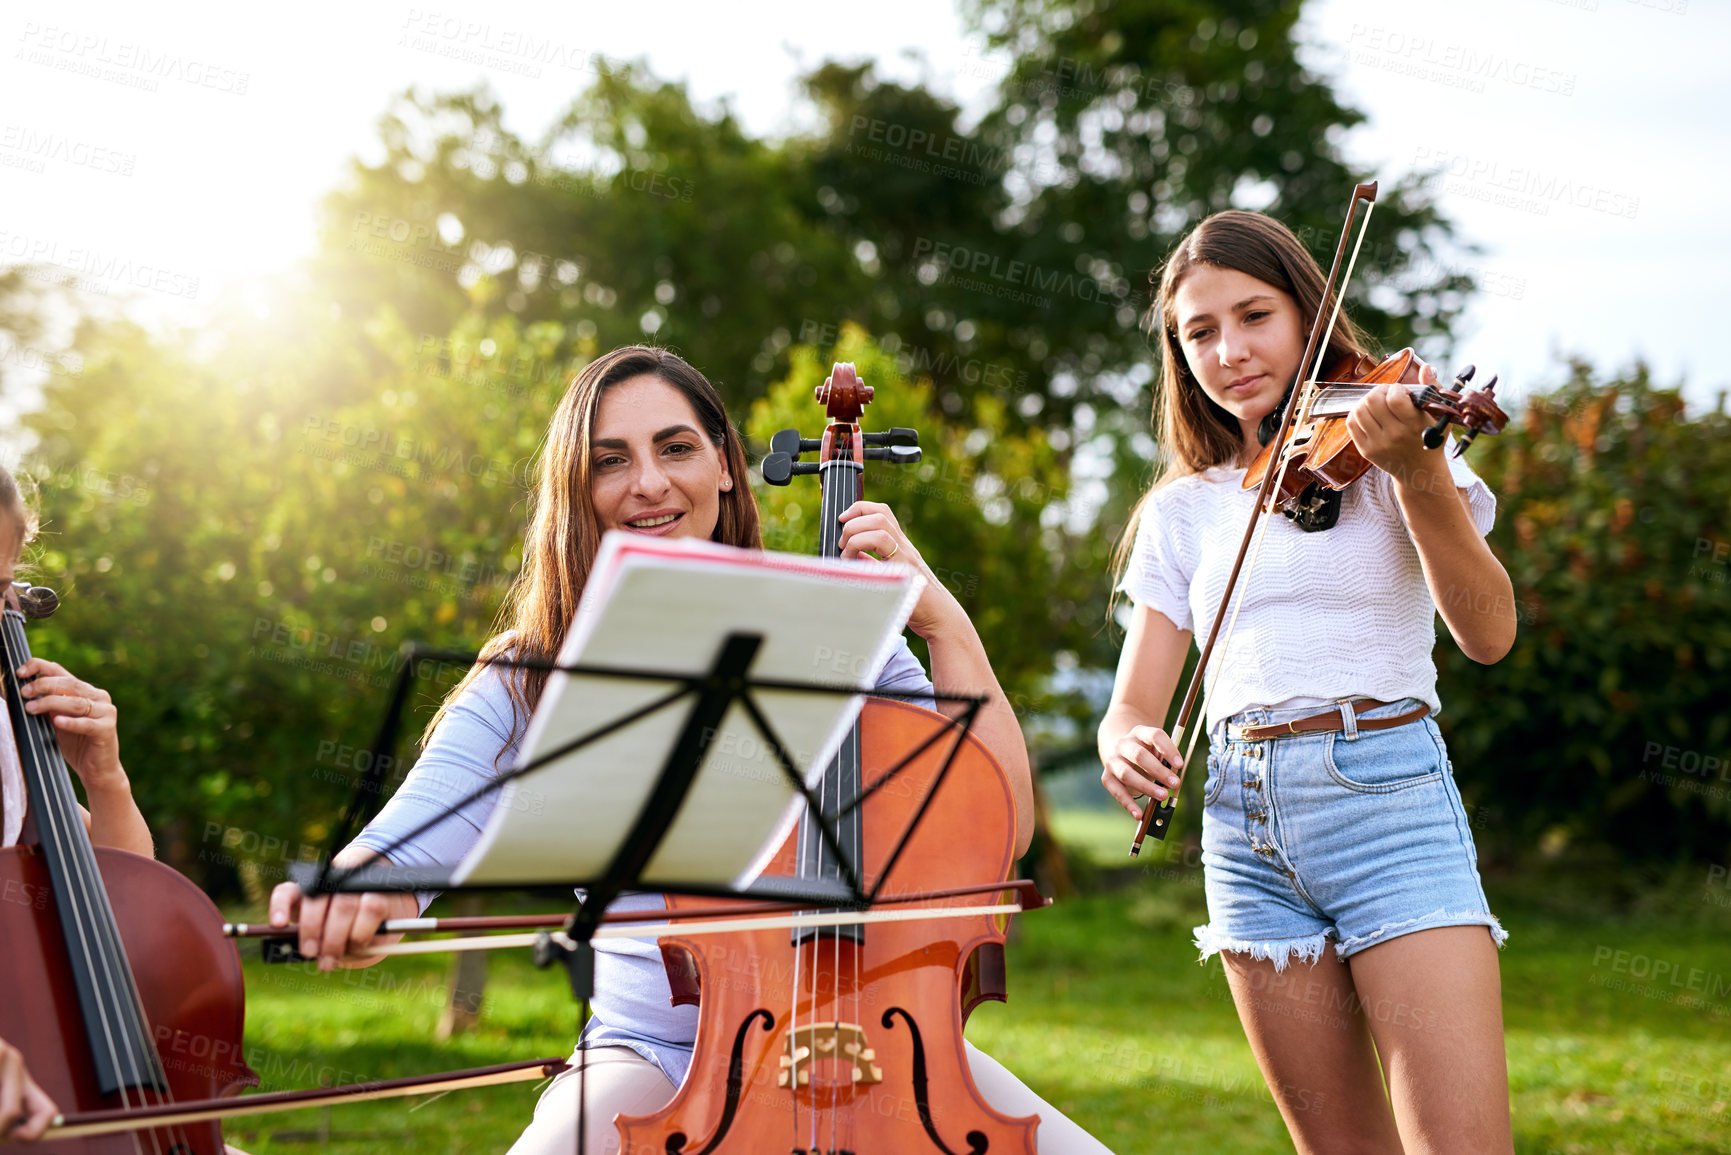 Buy stock photo Shot of a young girl playing a violin outdoors